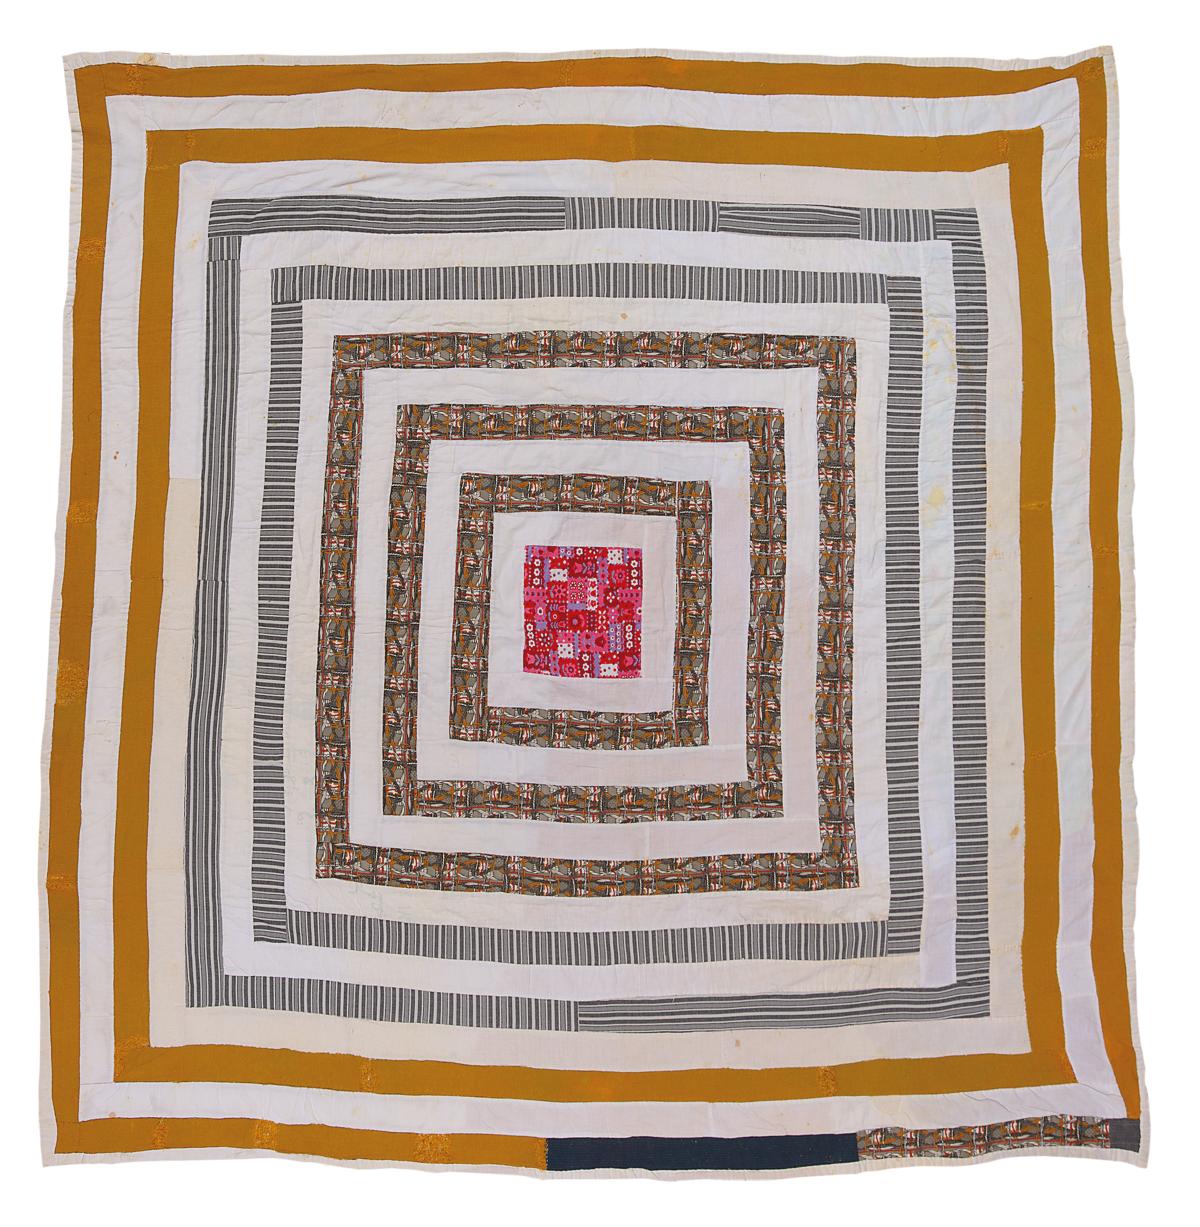 A square quilt made with concentric yellow and white squares with a pink square in the middle